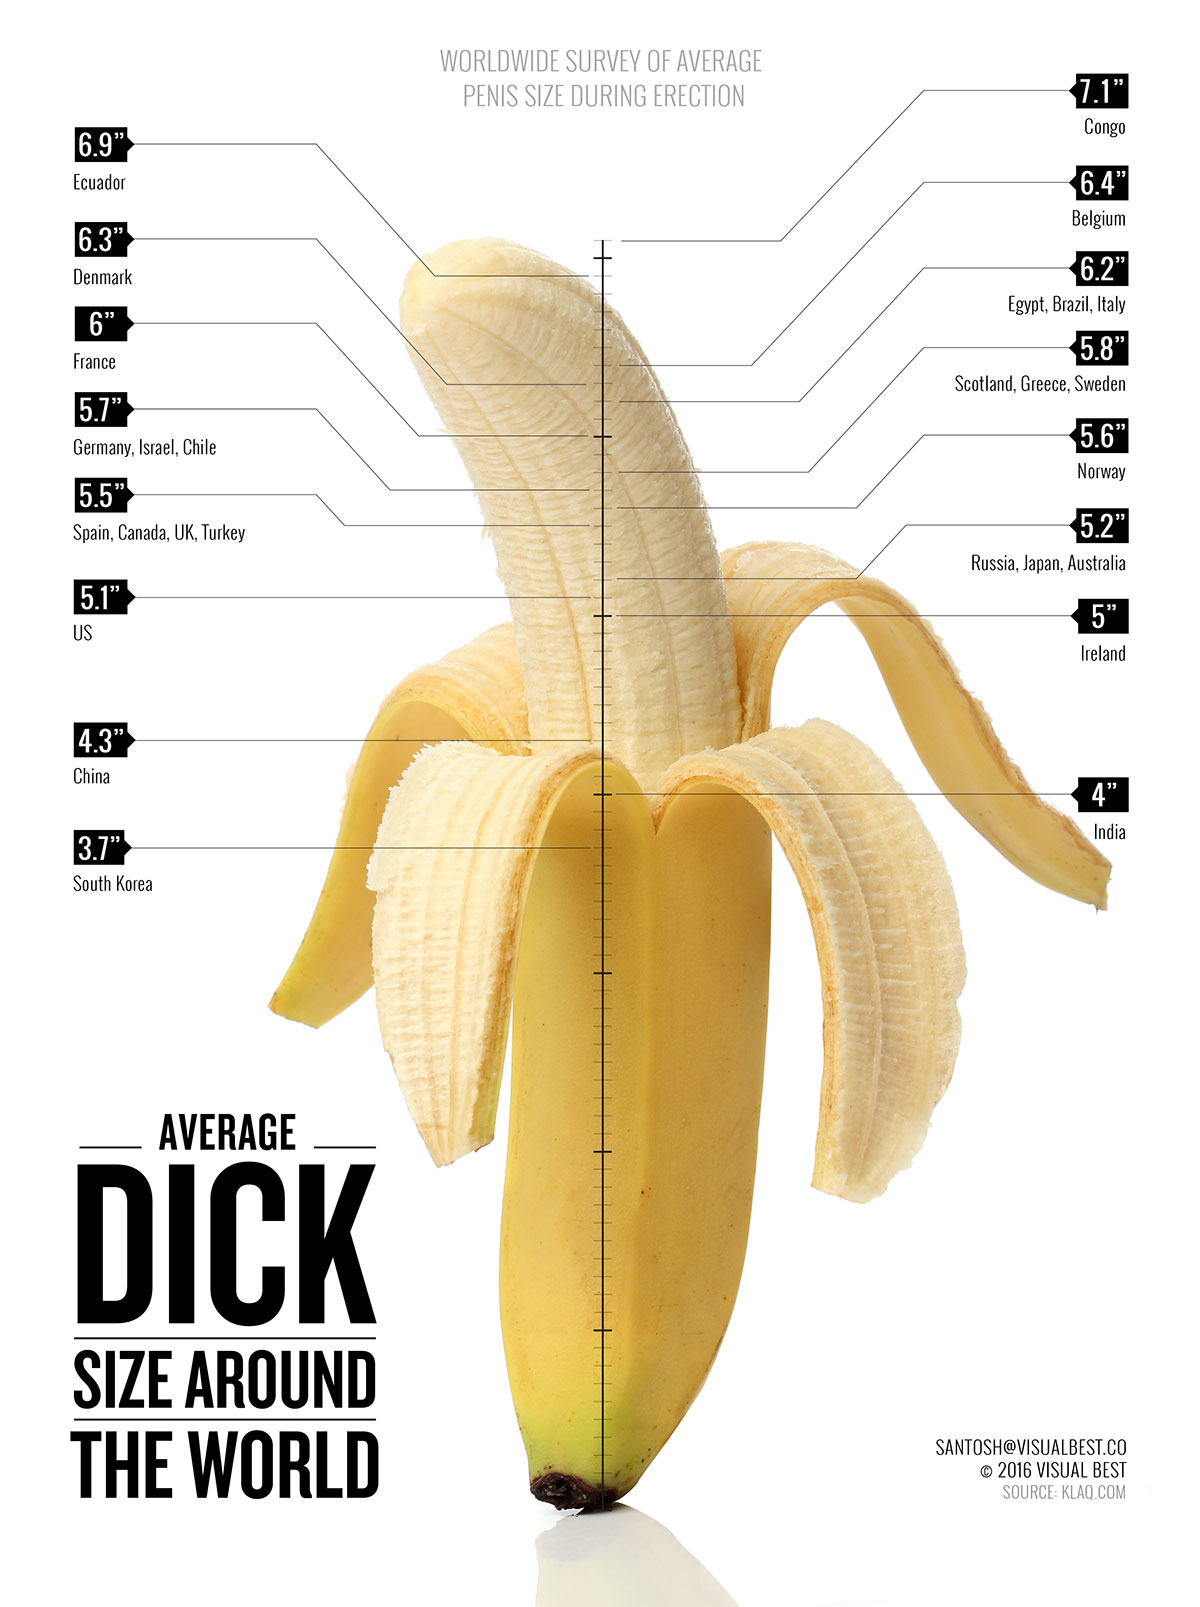 The average male penis is 5.6 inches